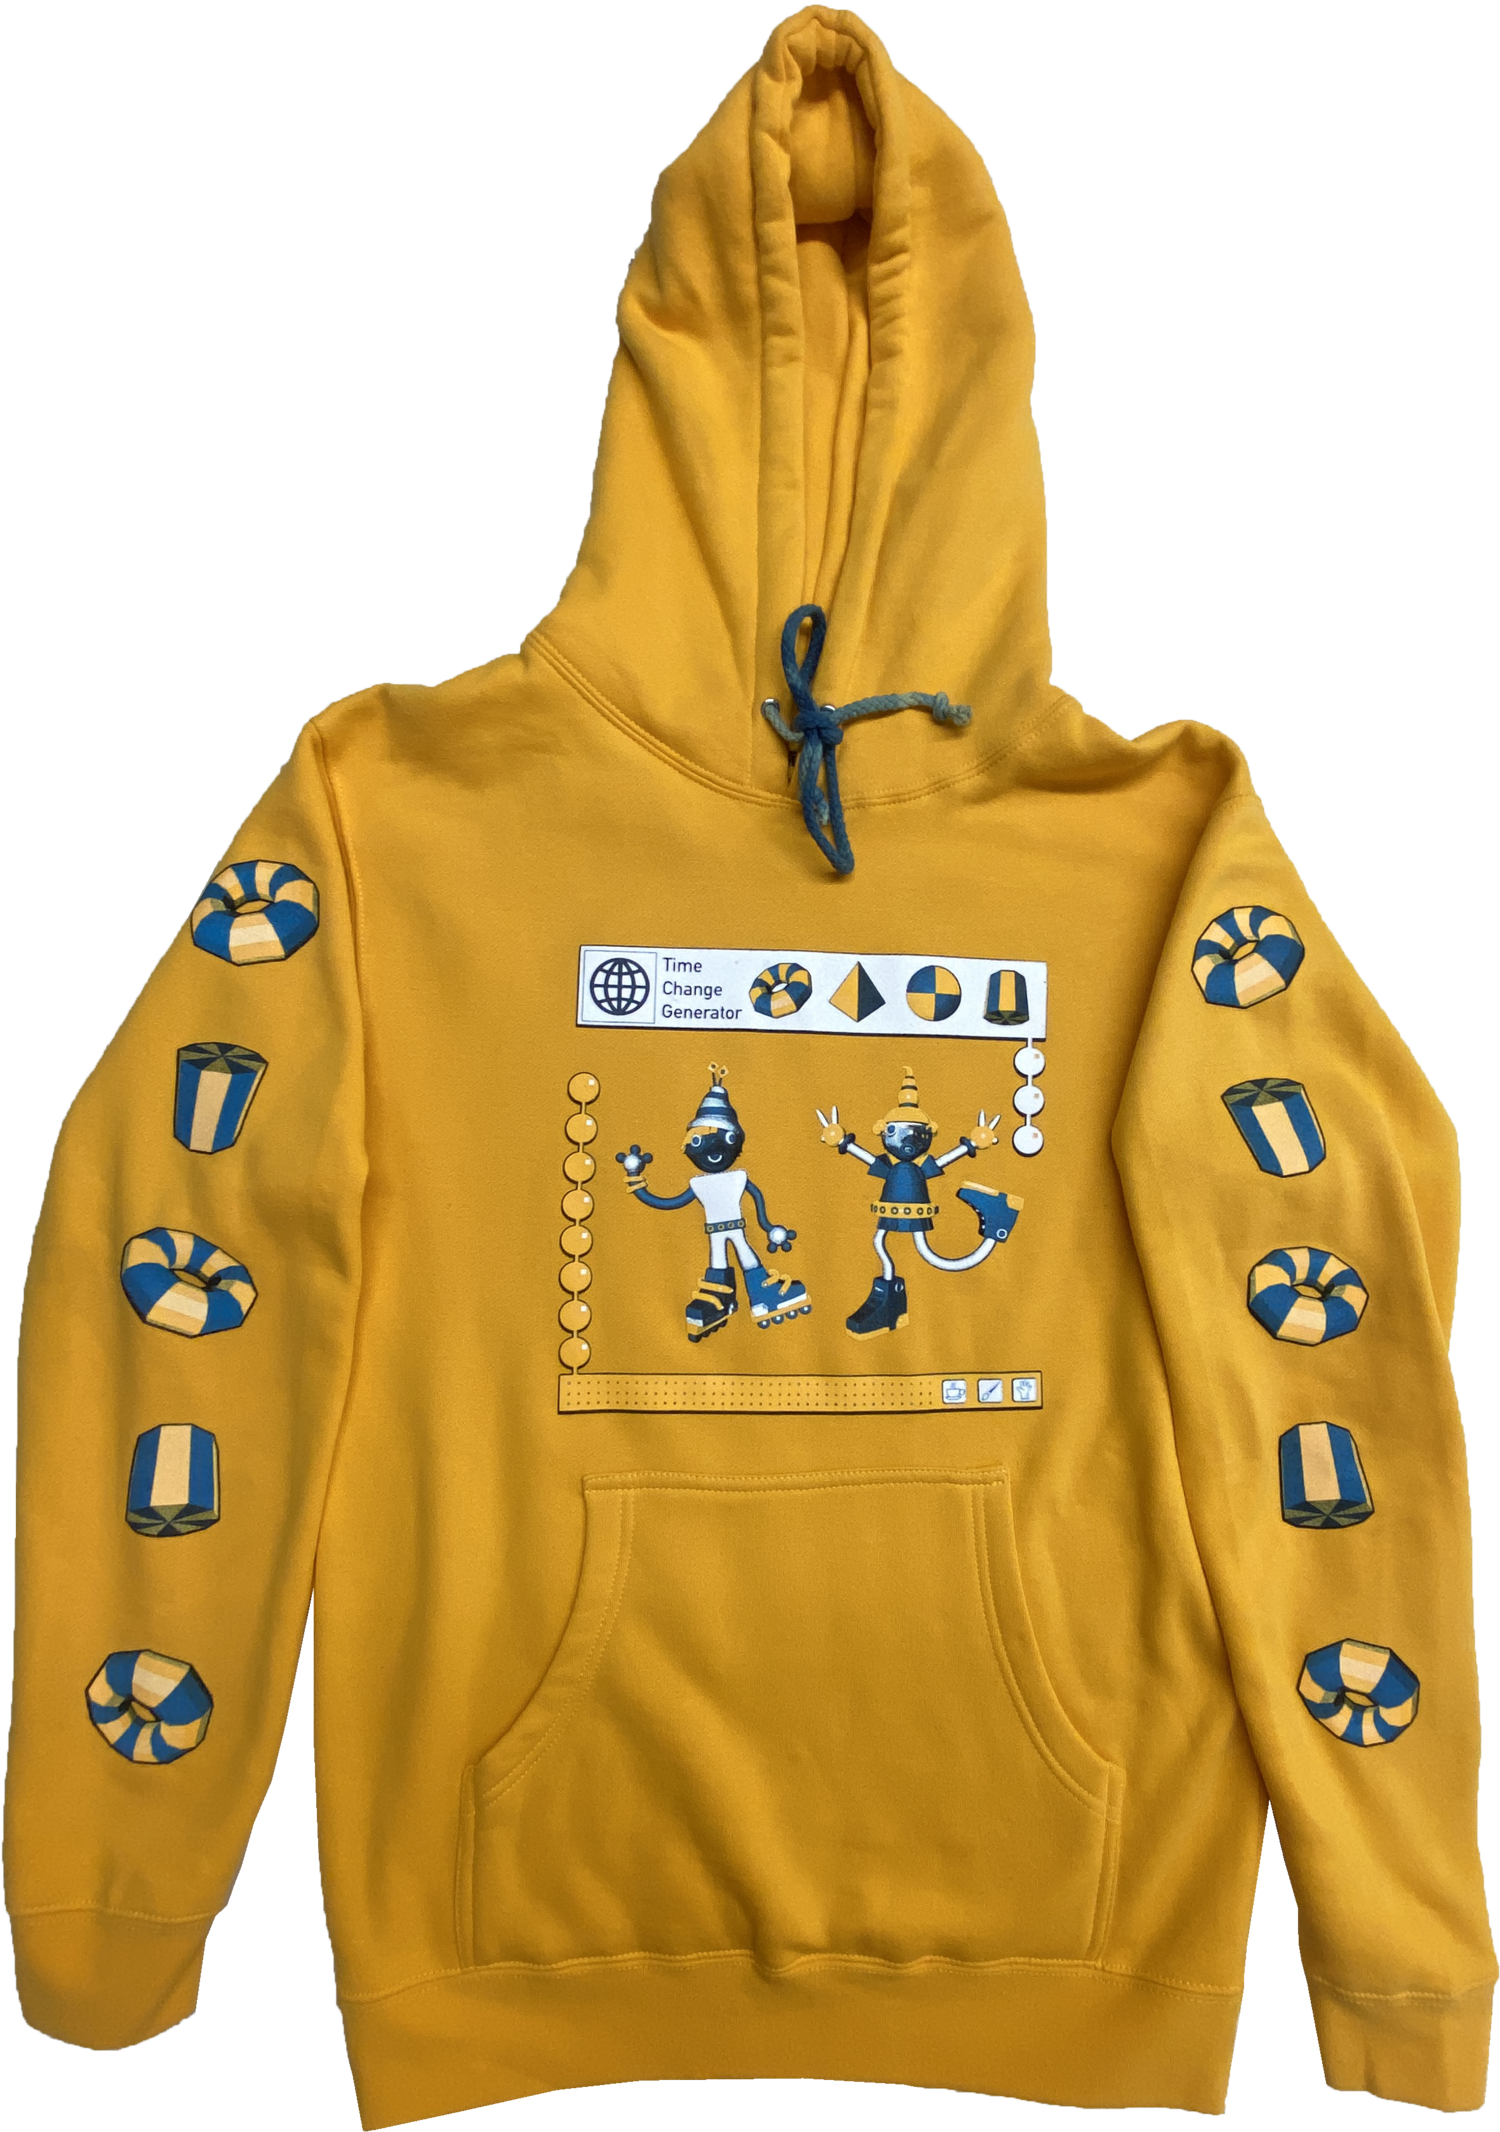 Detail of a long-sleeve bright yellow hoodie with 3D graphics on the chest and sleeves